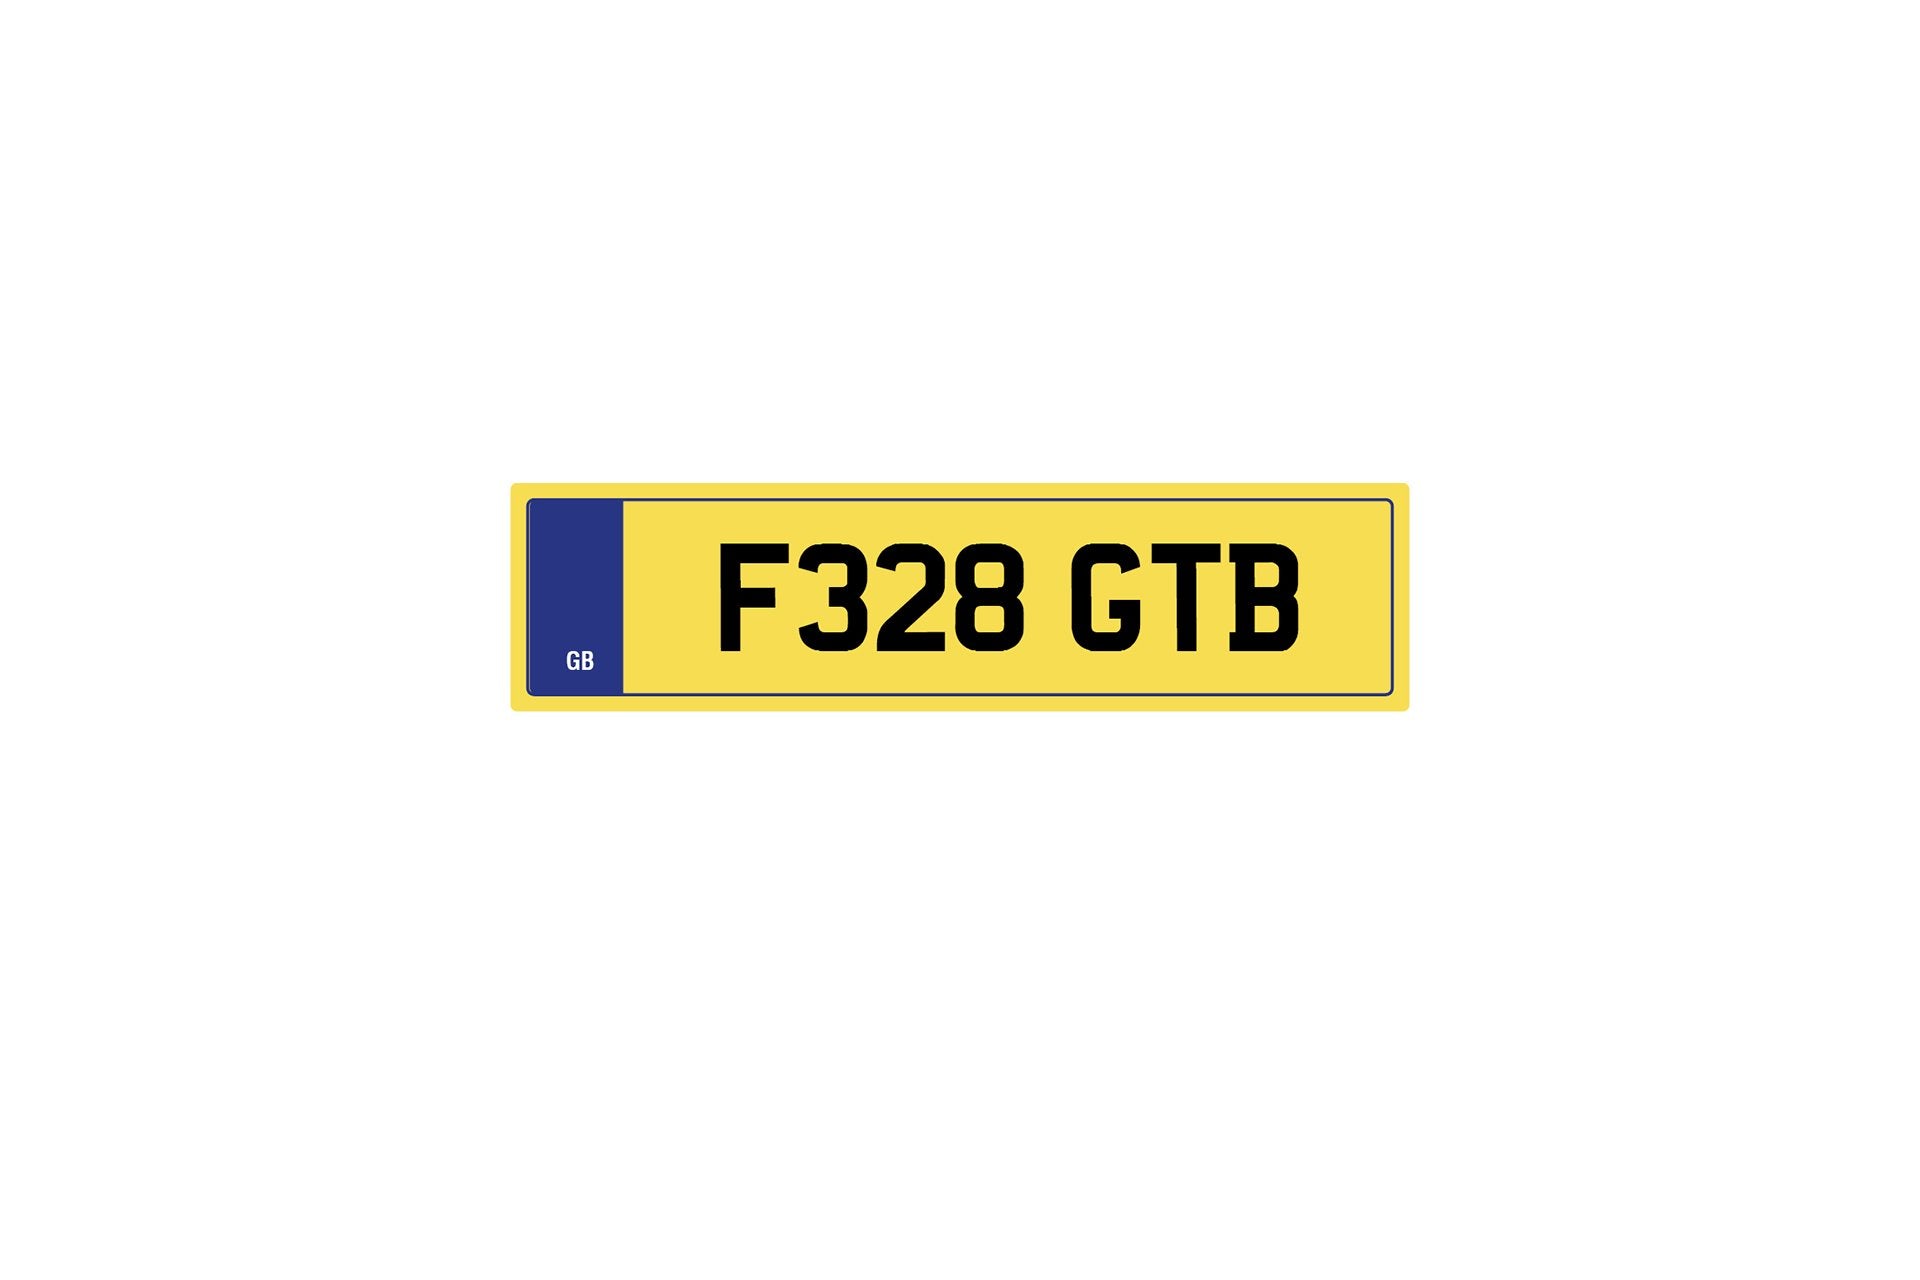 Private Plate F328 Gtb by Kahn - Image 243